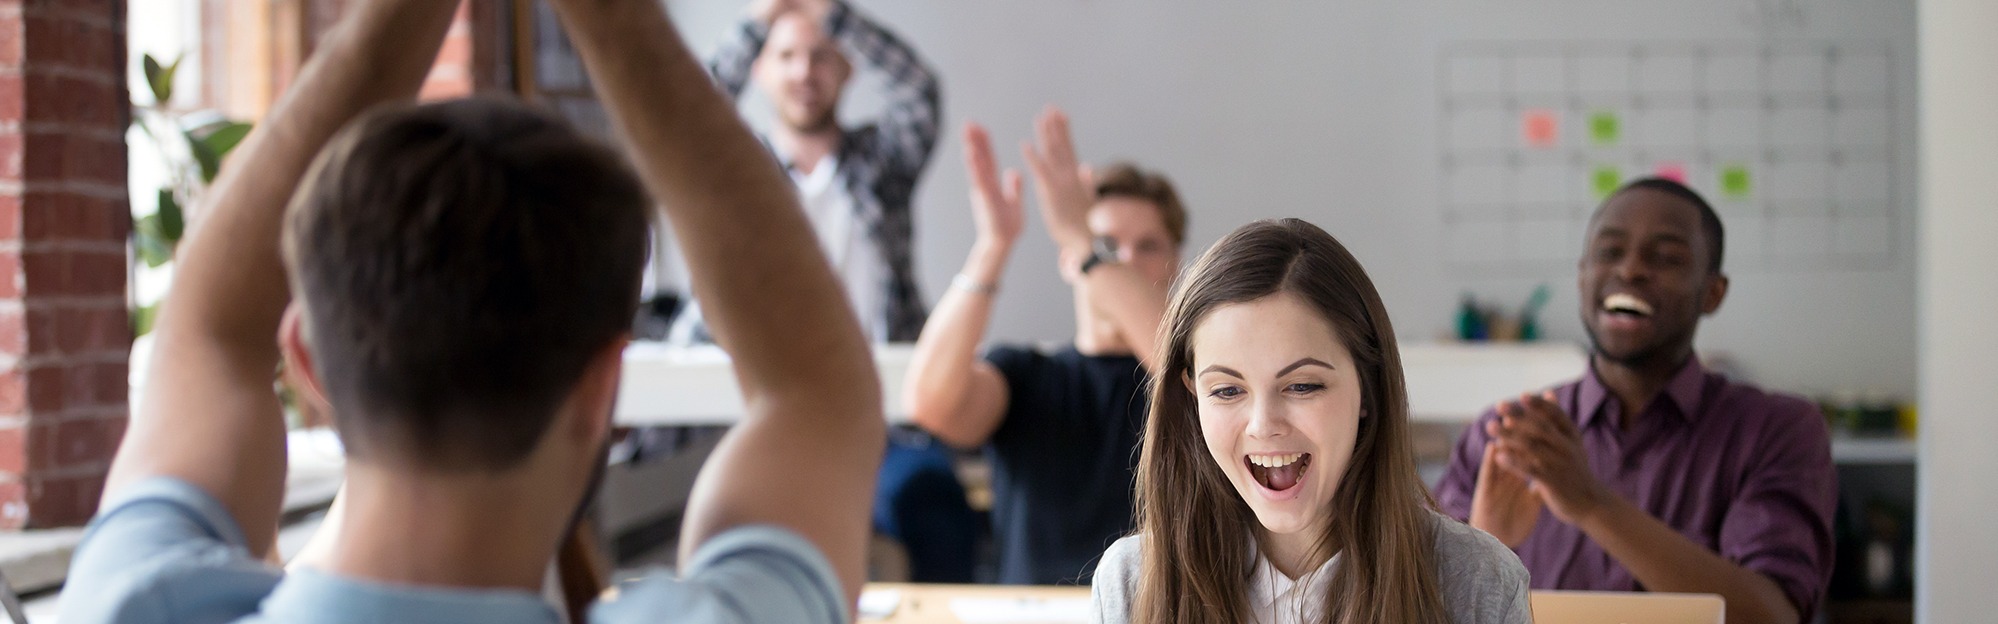 Office colleagues congratulating happy woman excited by good news online.